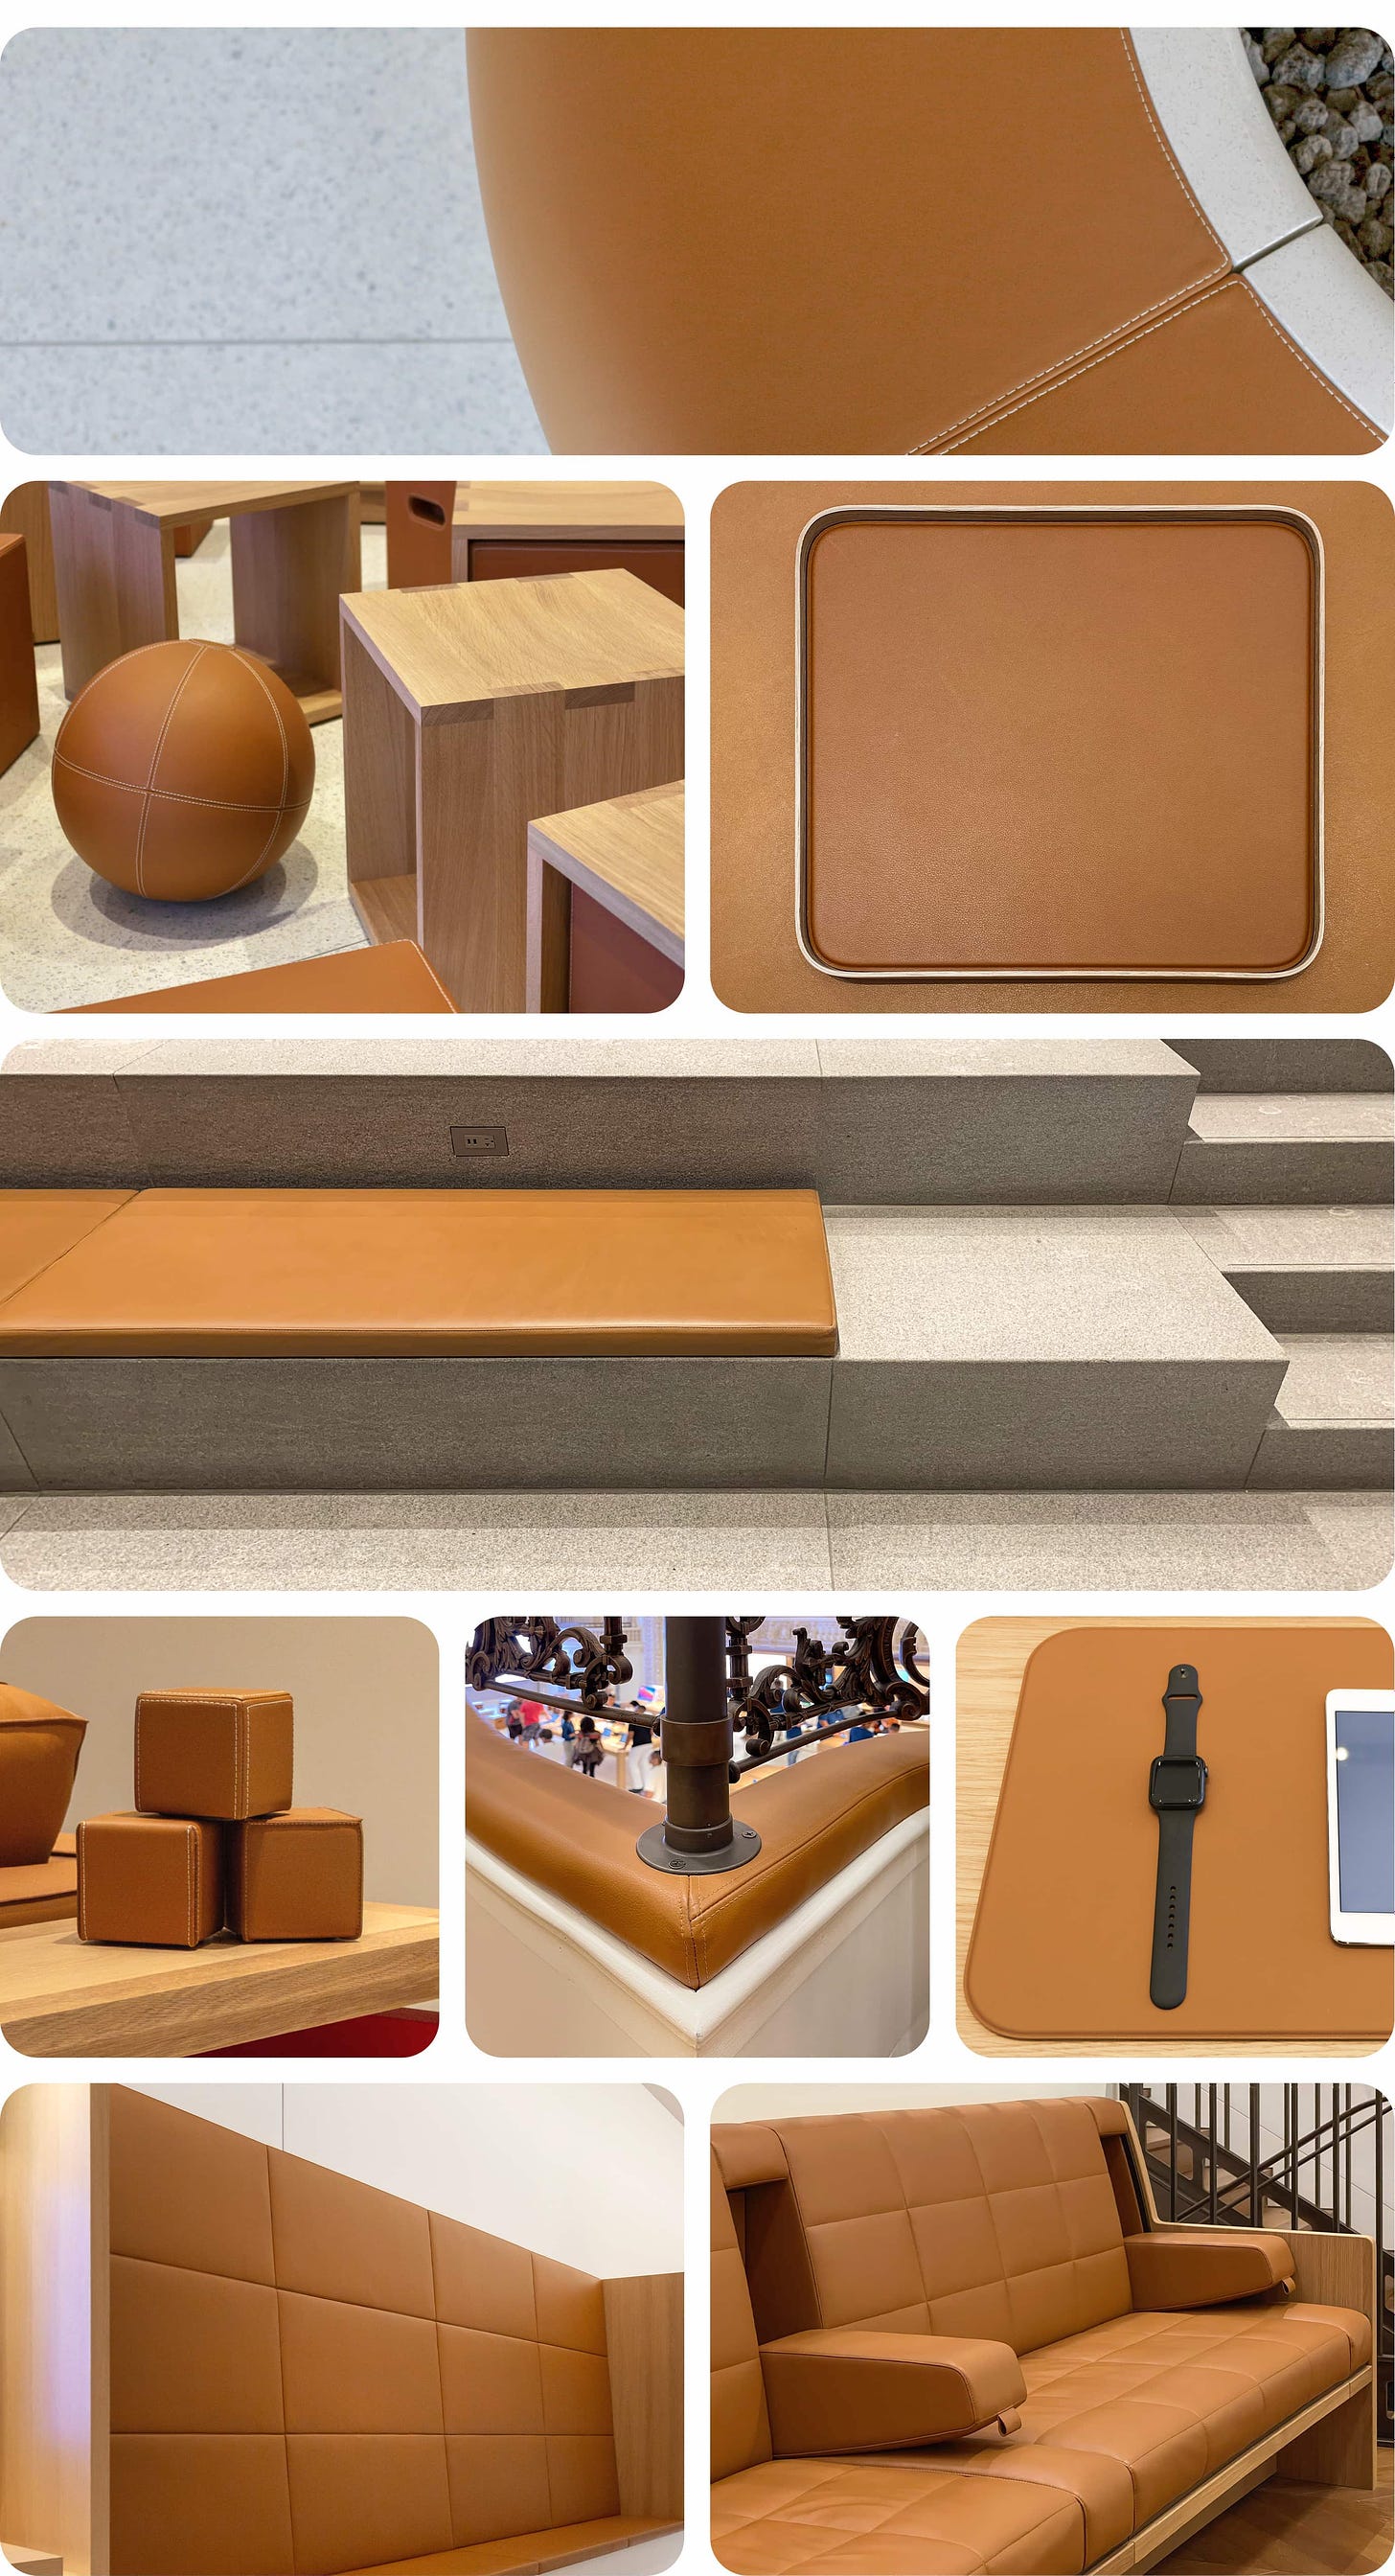 A collage of saddle brown leather fixtures found in Apple Stores.